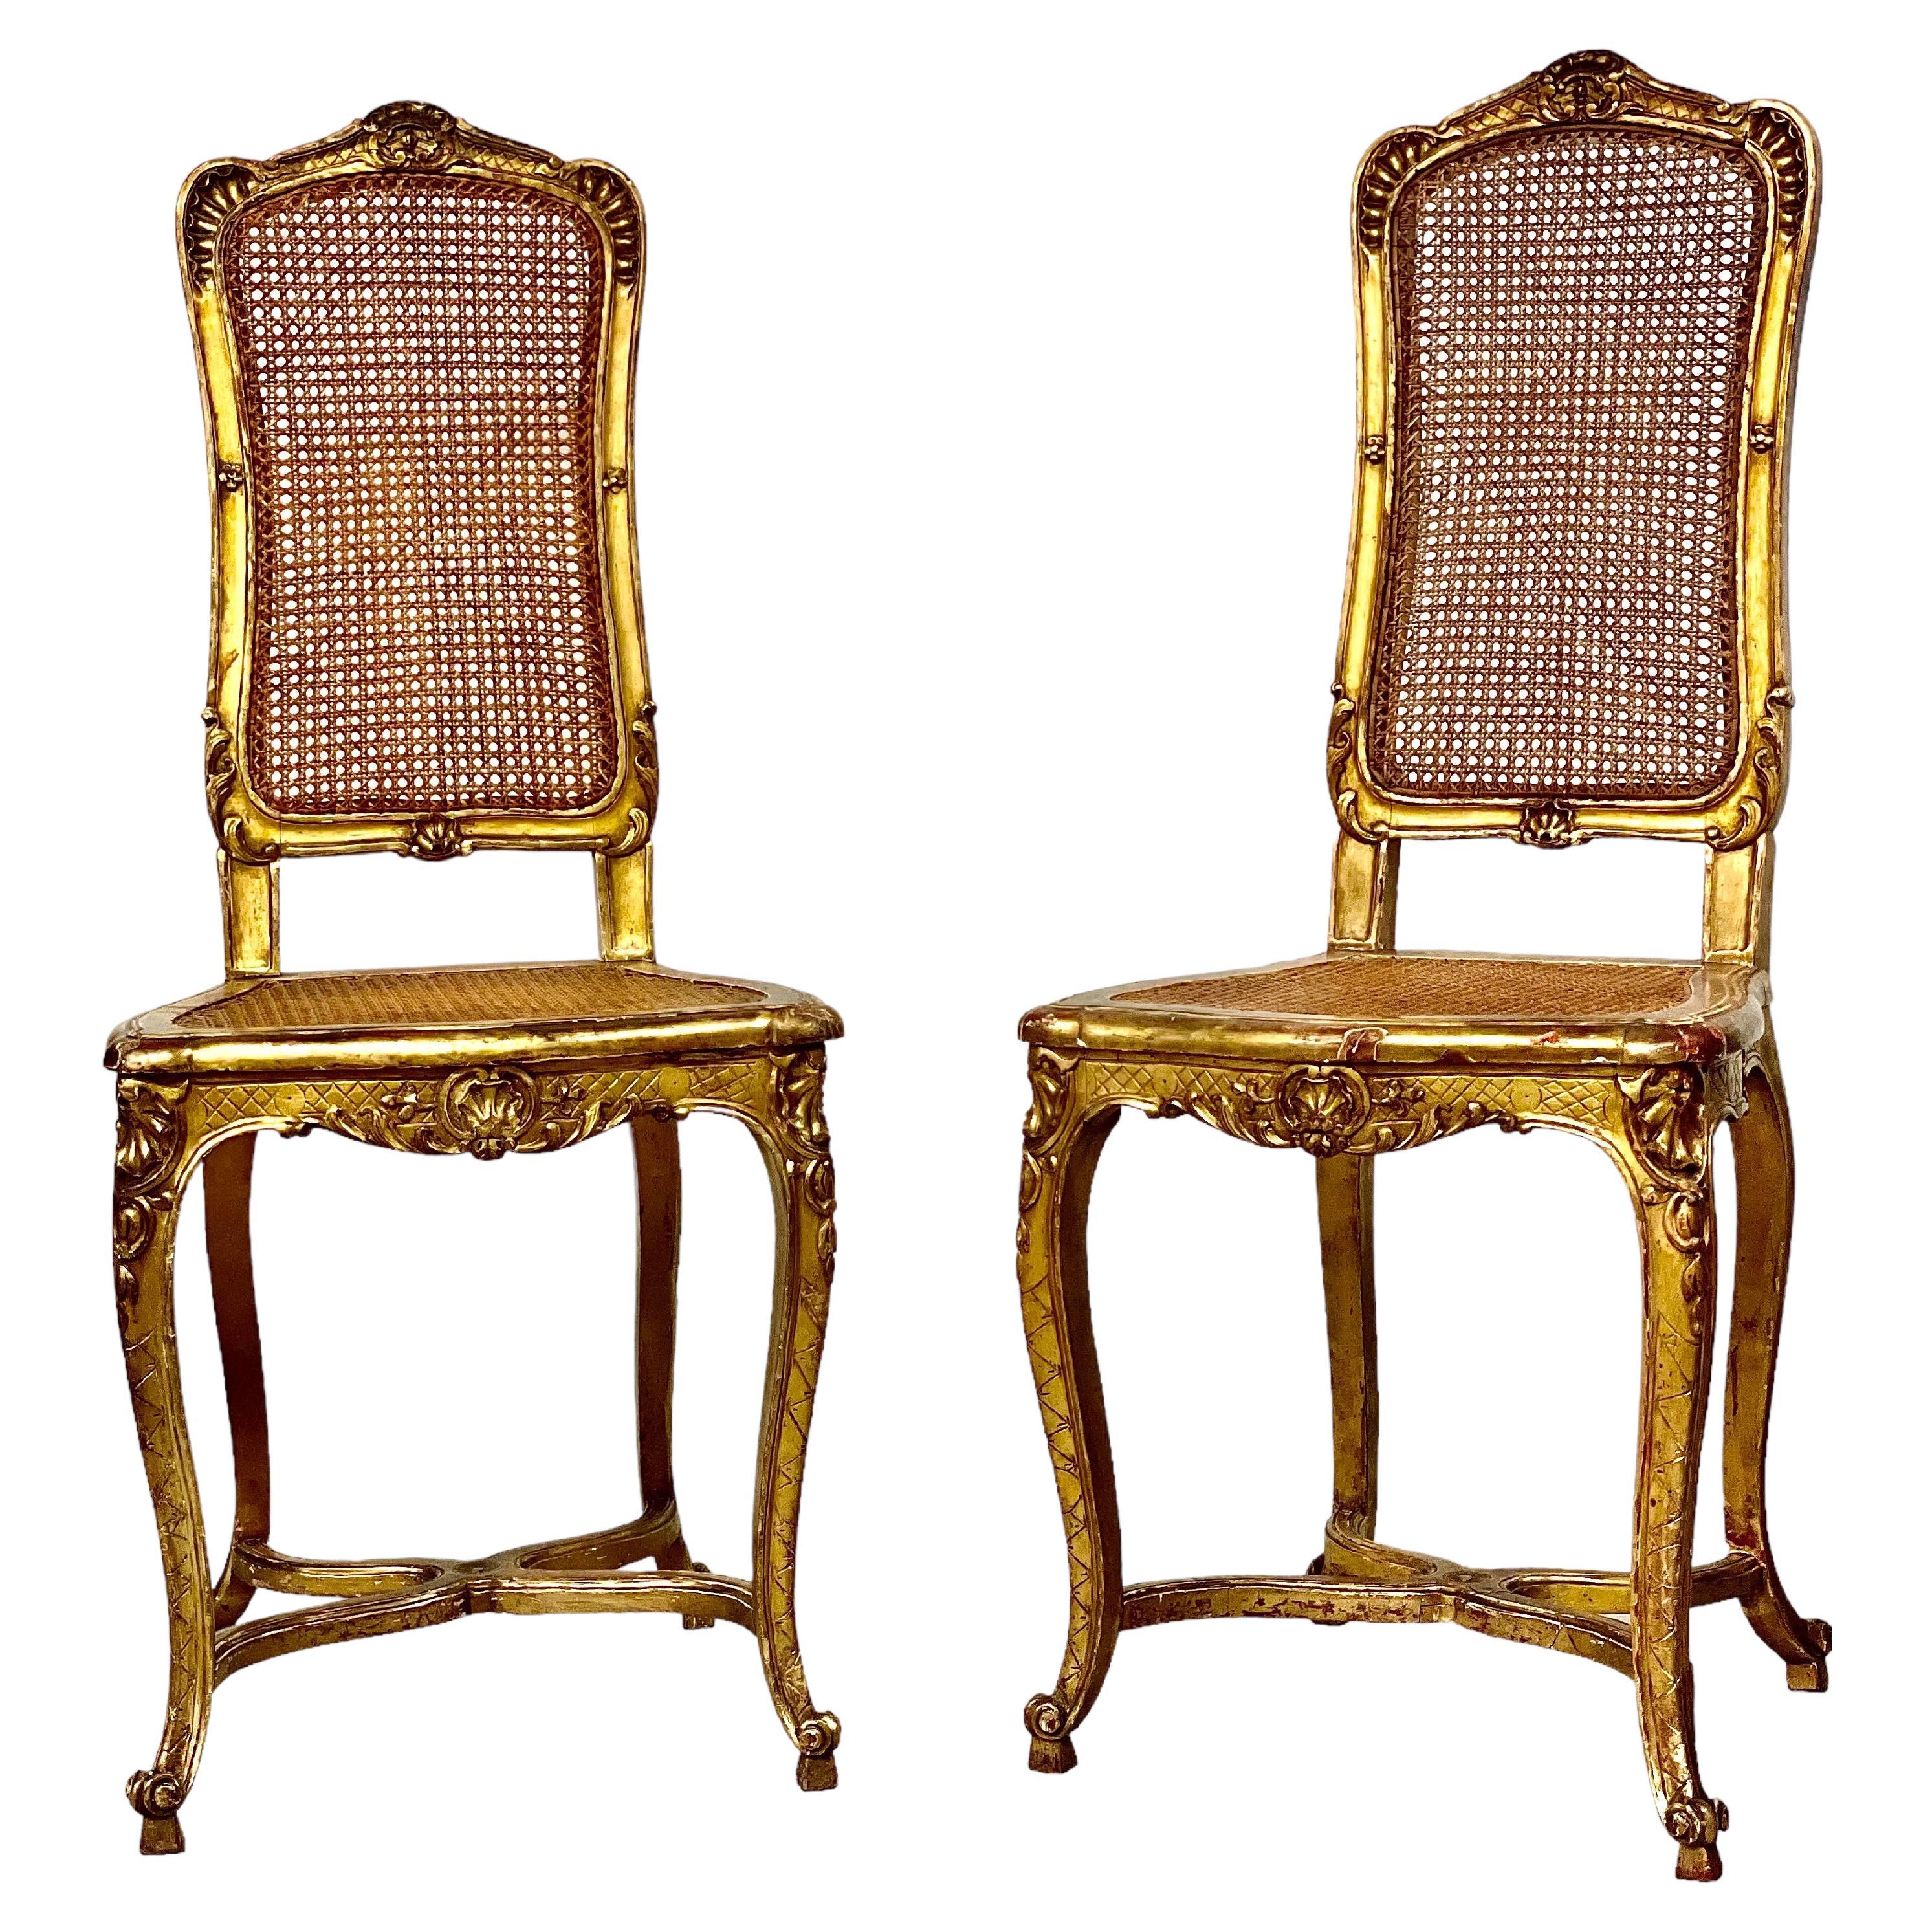 Pair of French Antique Giltwood Caned Side Chairs